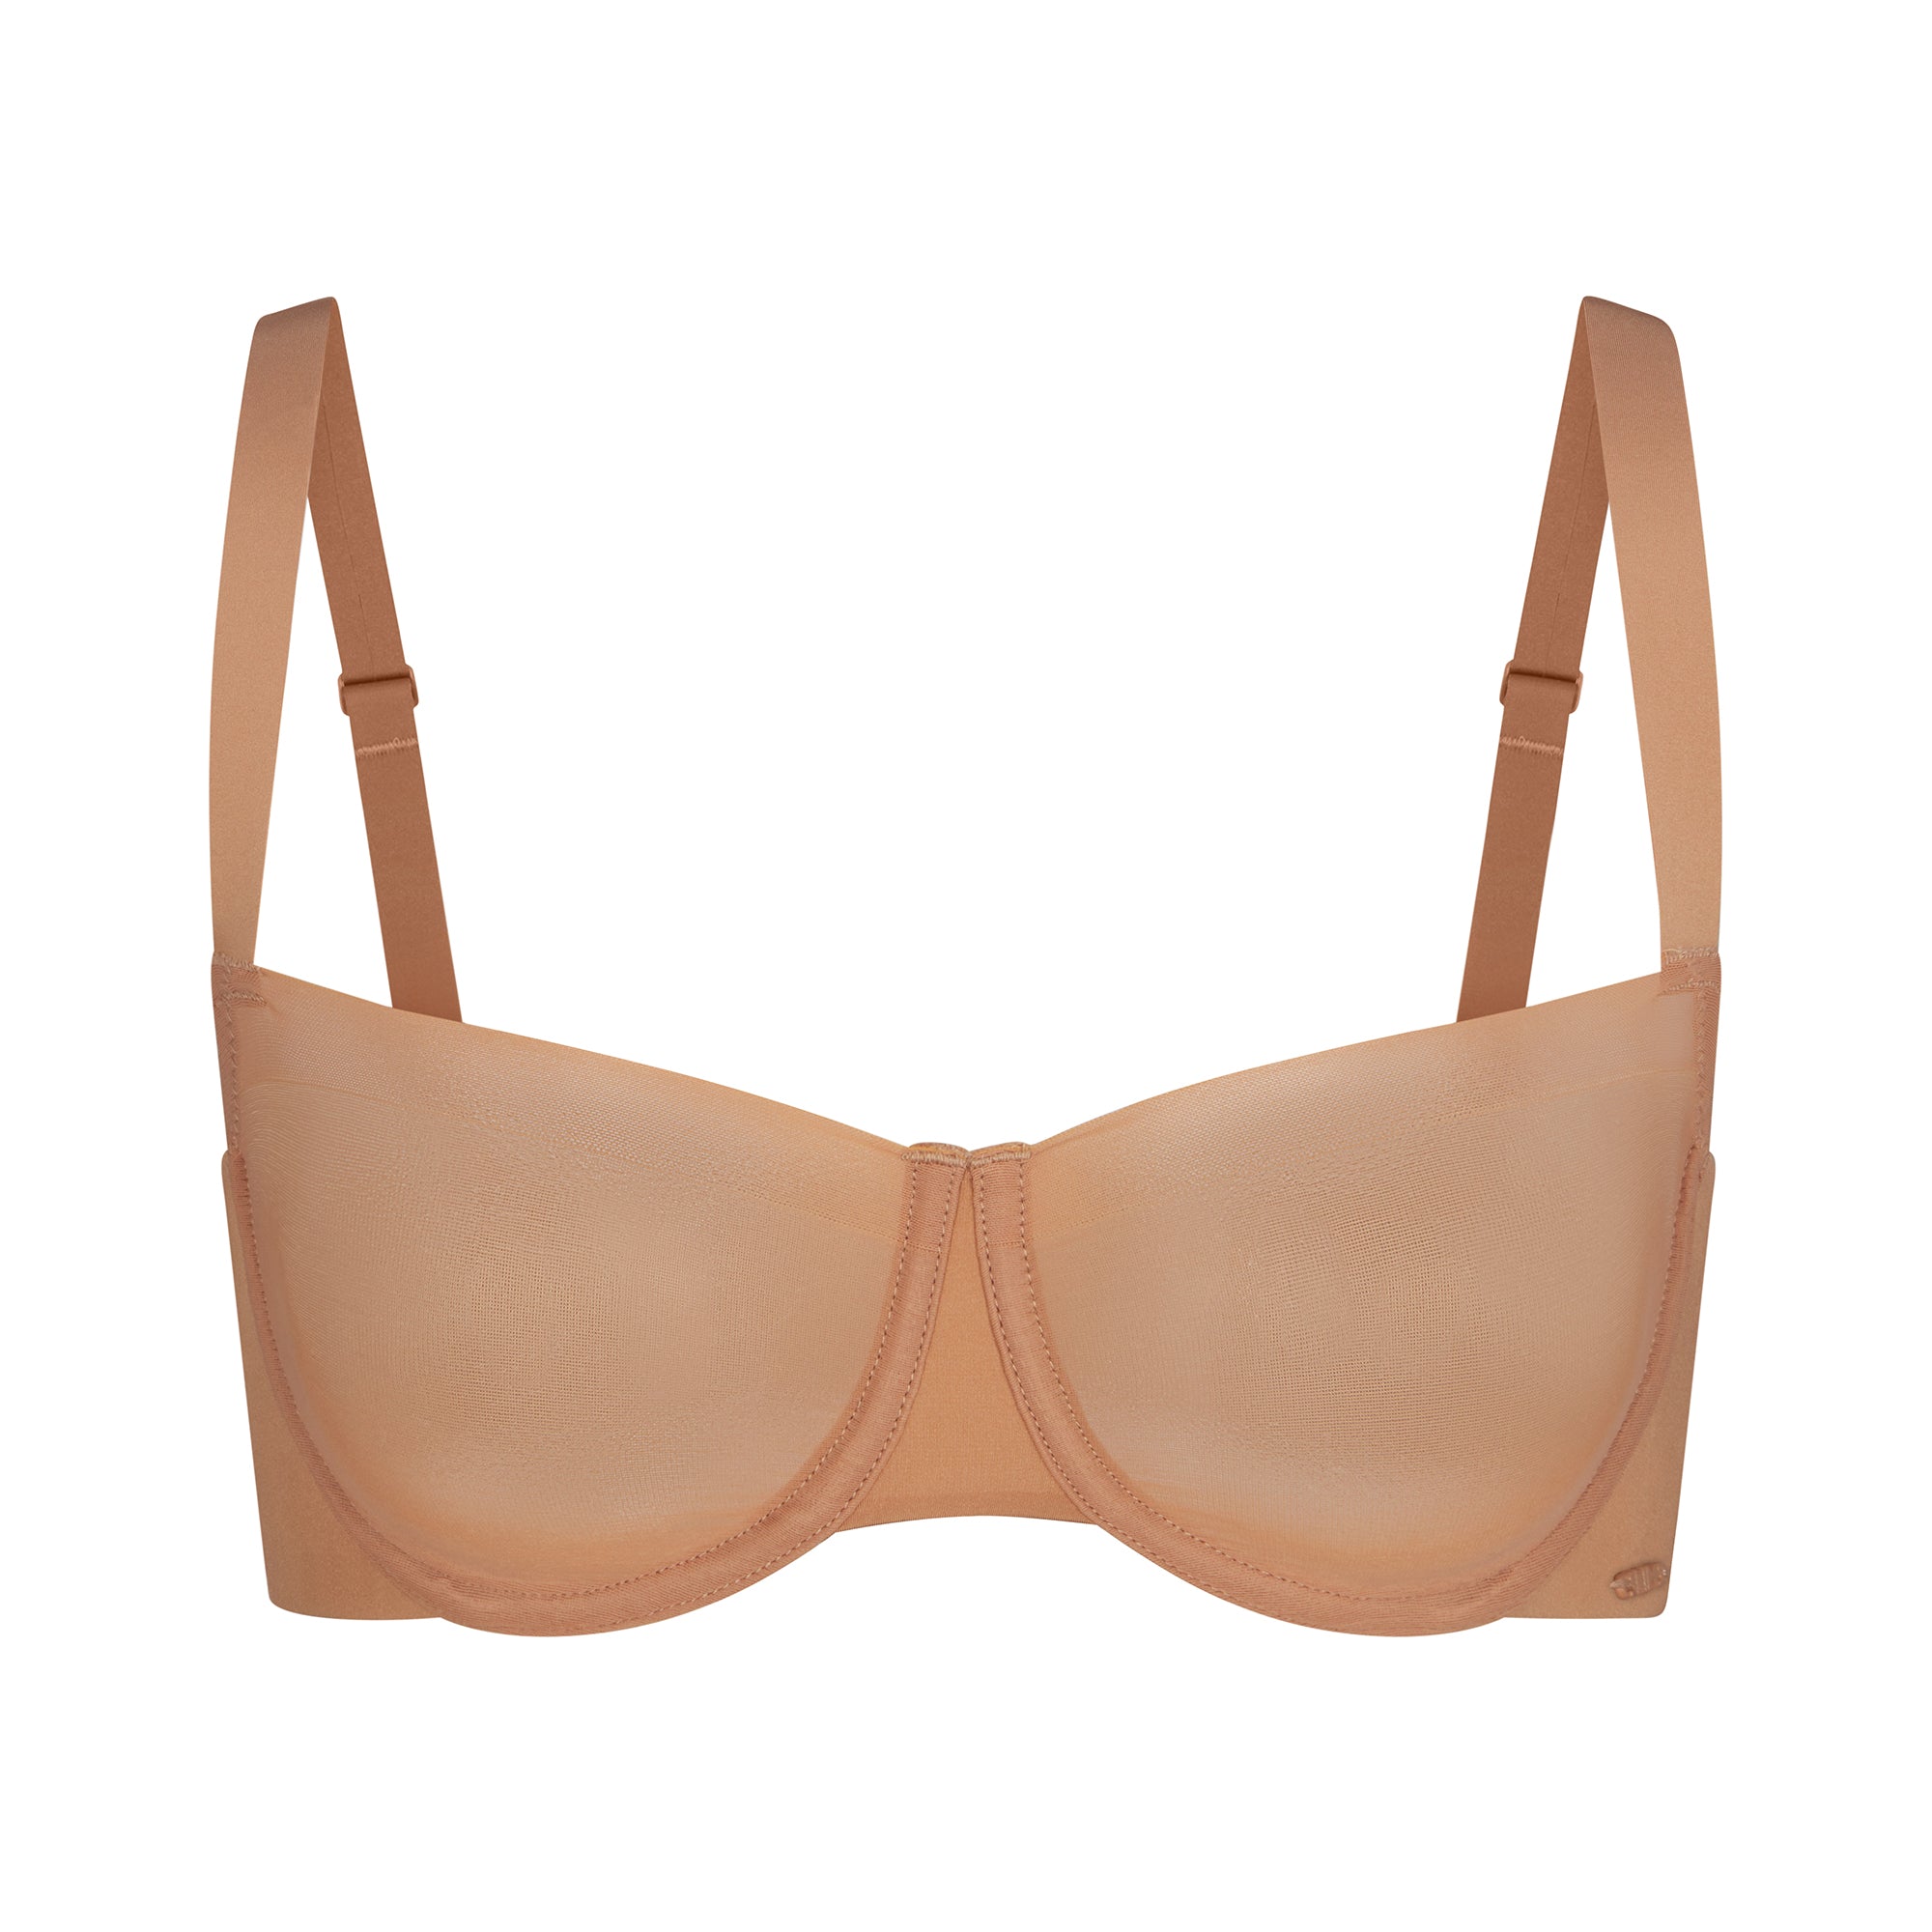 SKIMS 34A NO show unlined balconette bra - Ochre - New With Tags £30.00 -  PicClick UK